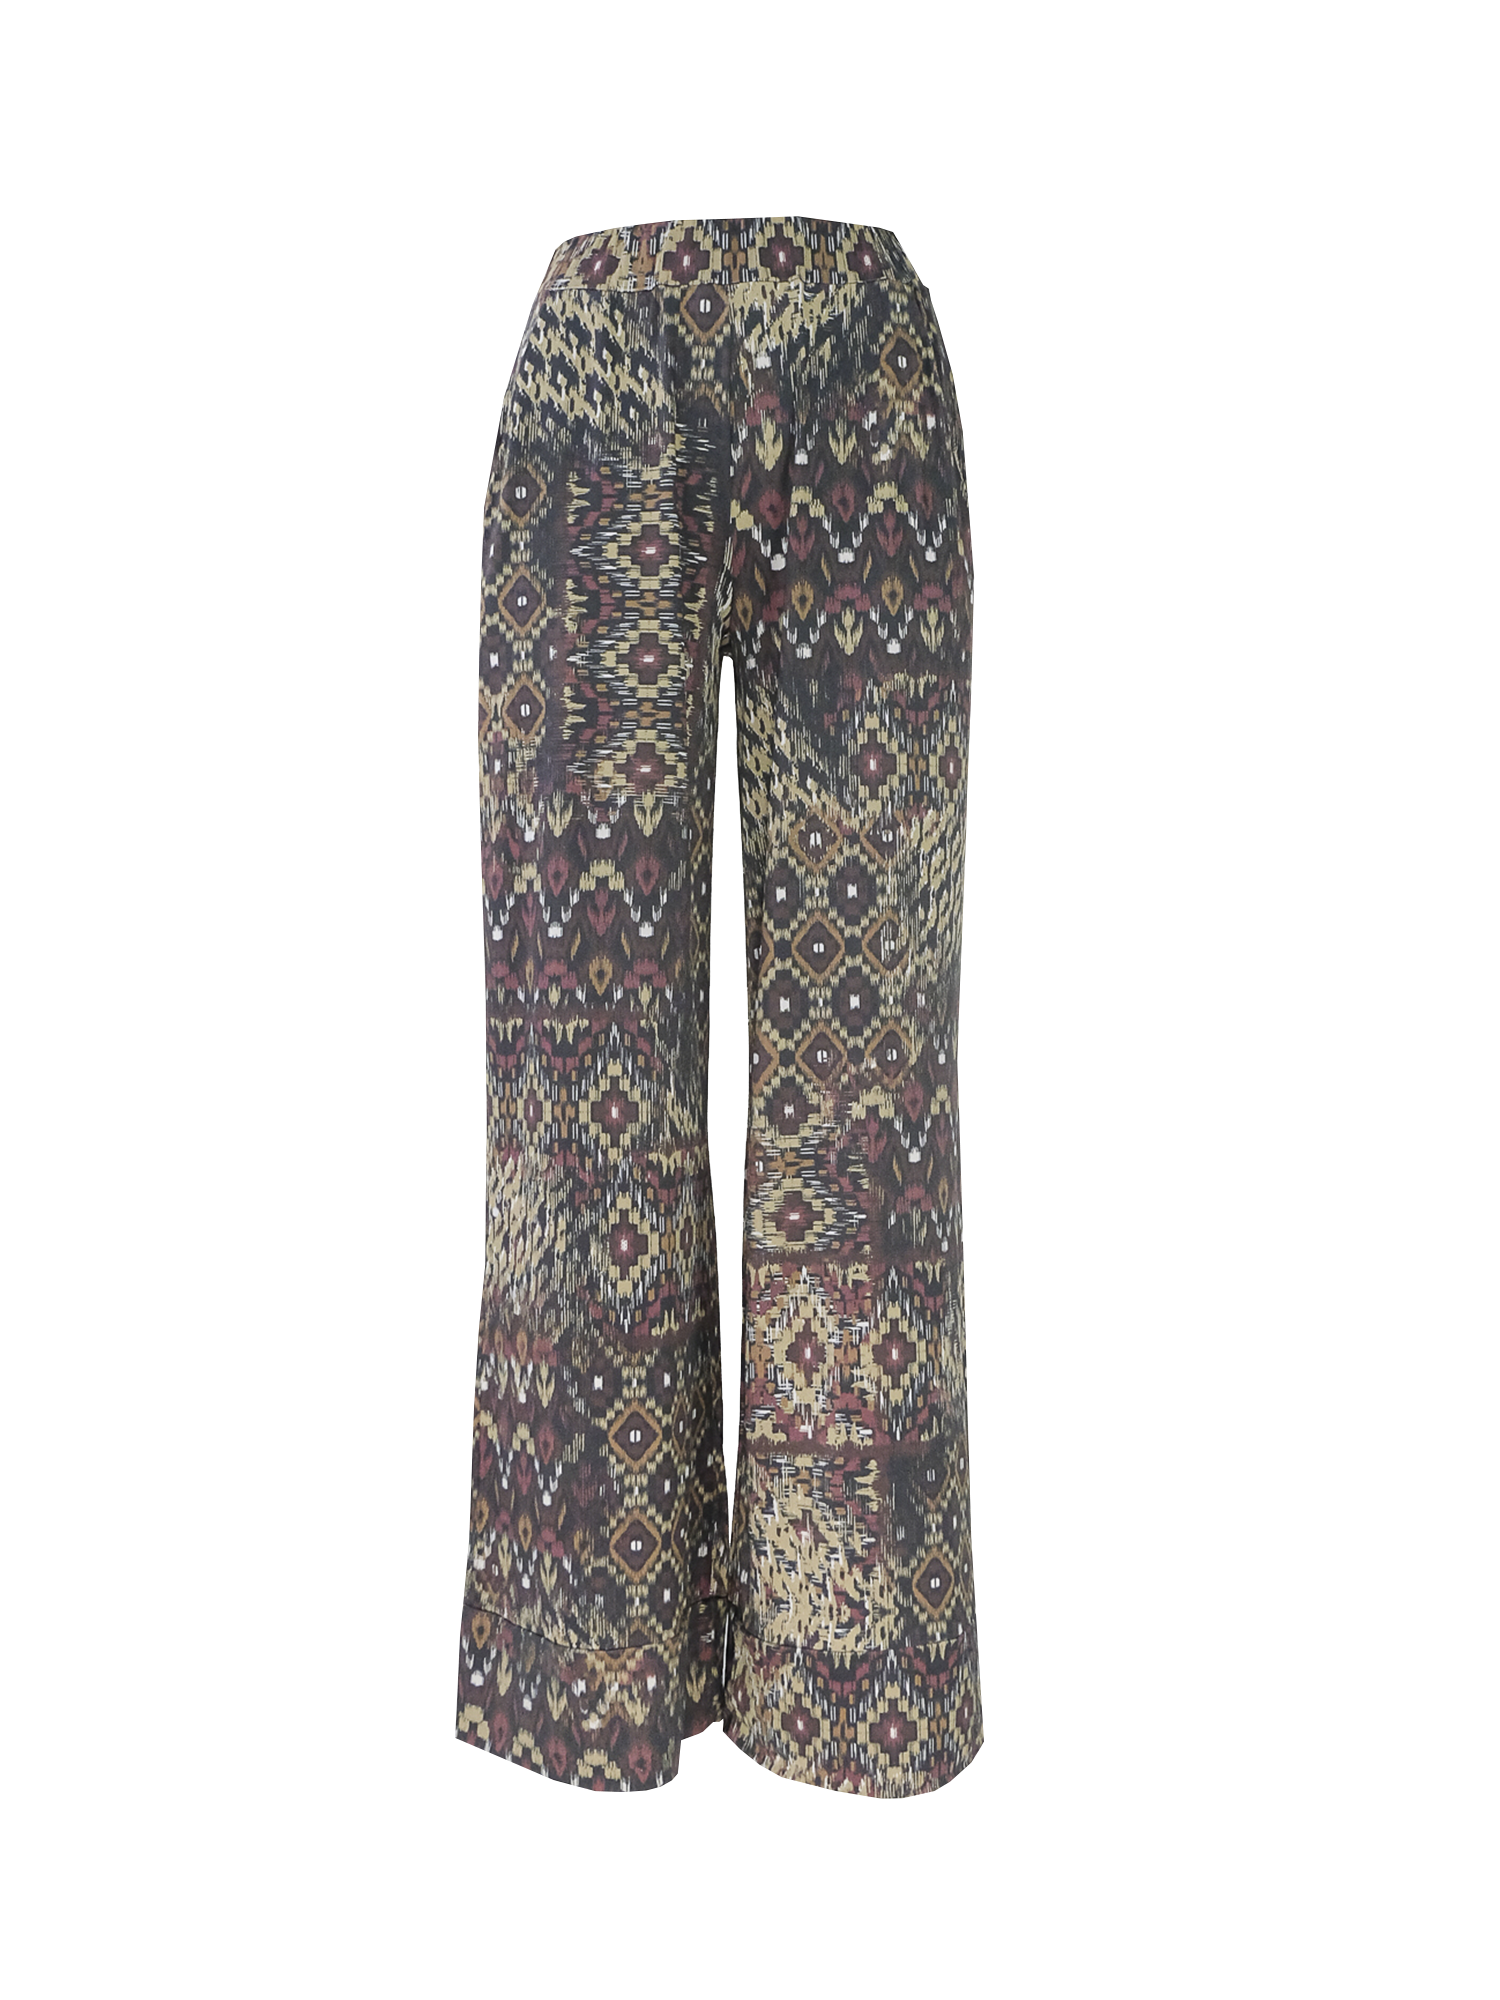 AIDA - earth-patterned palazzo pants in lycra